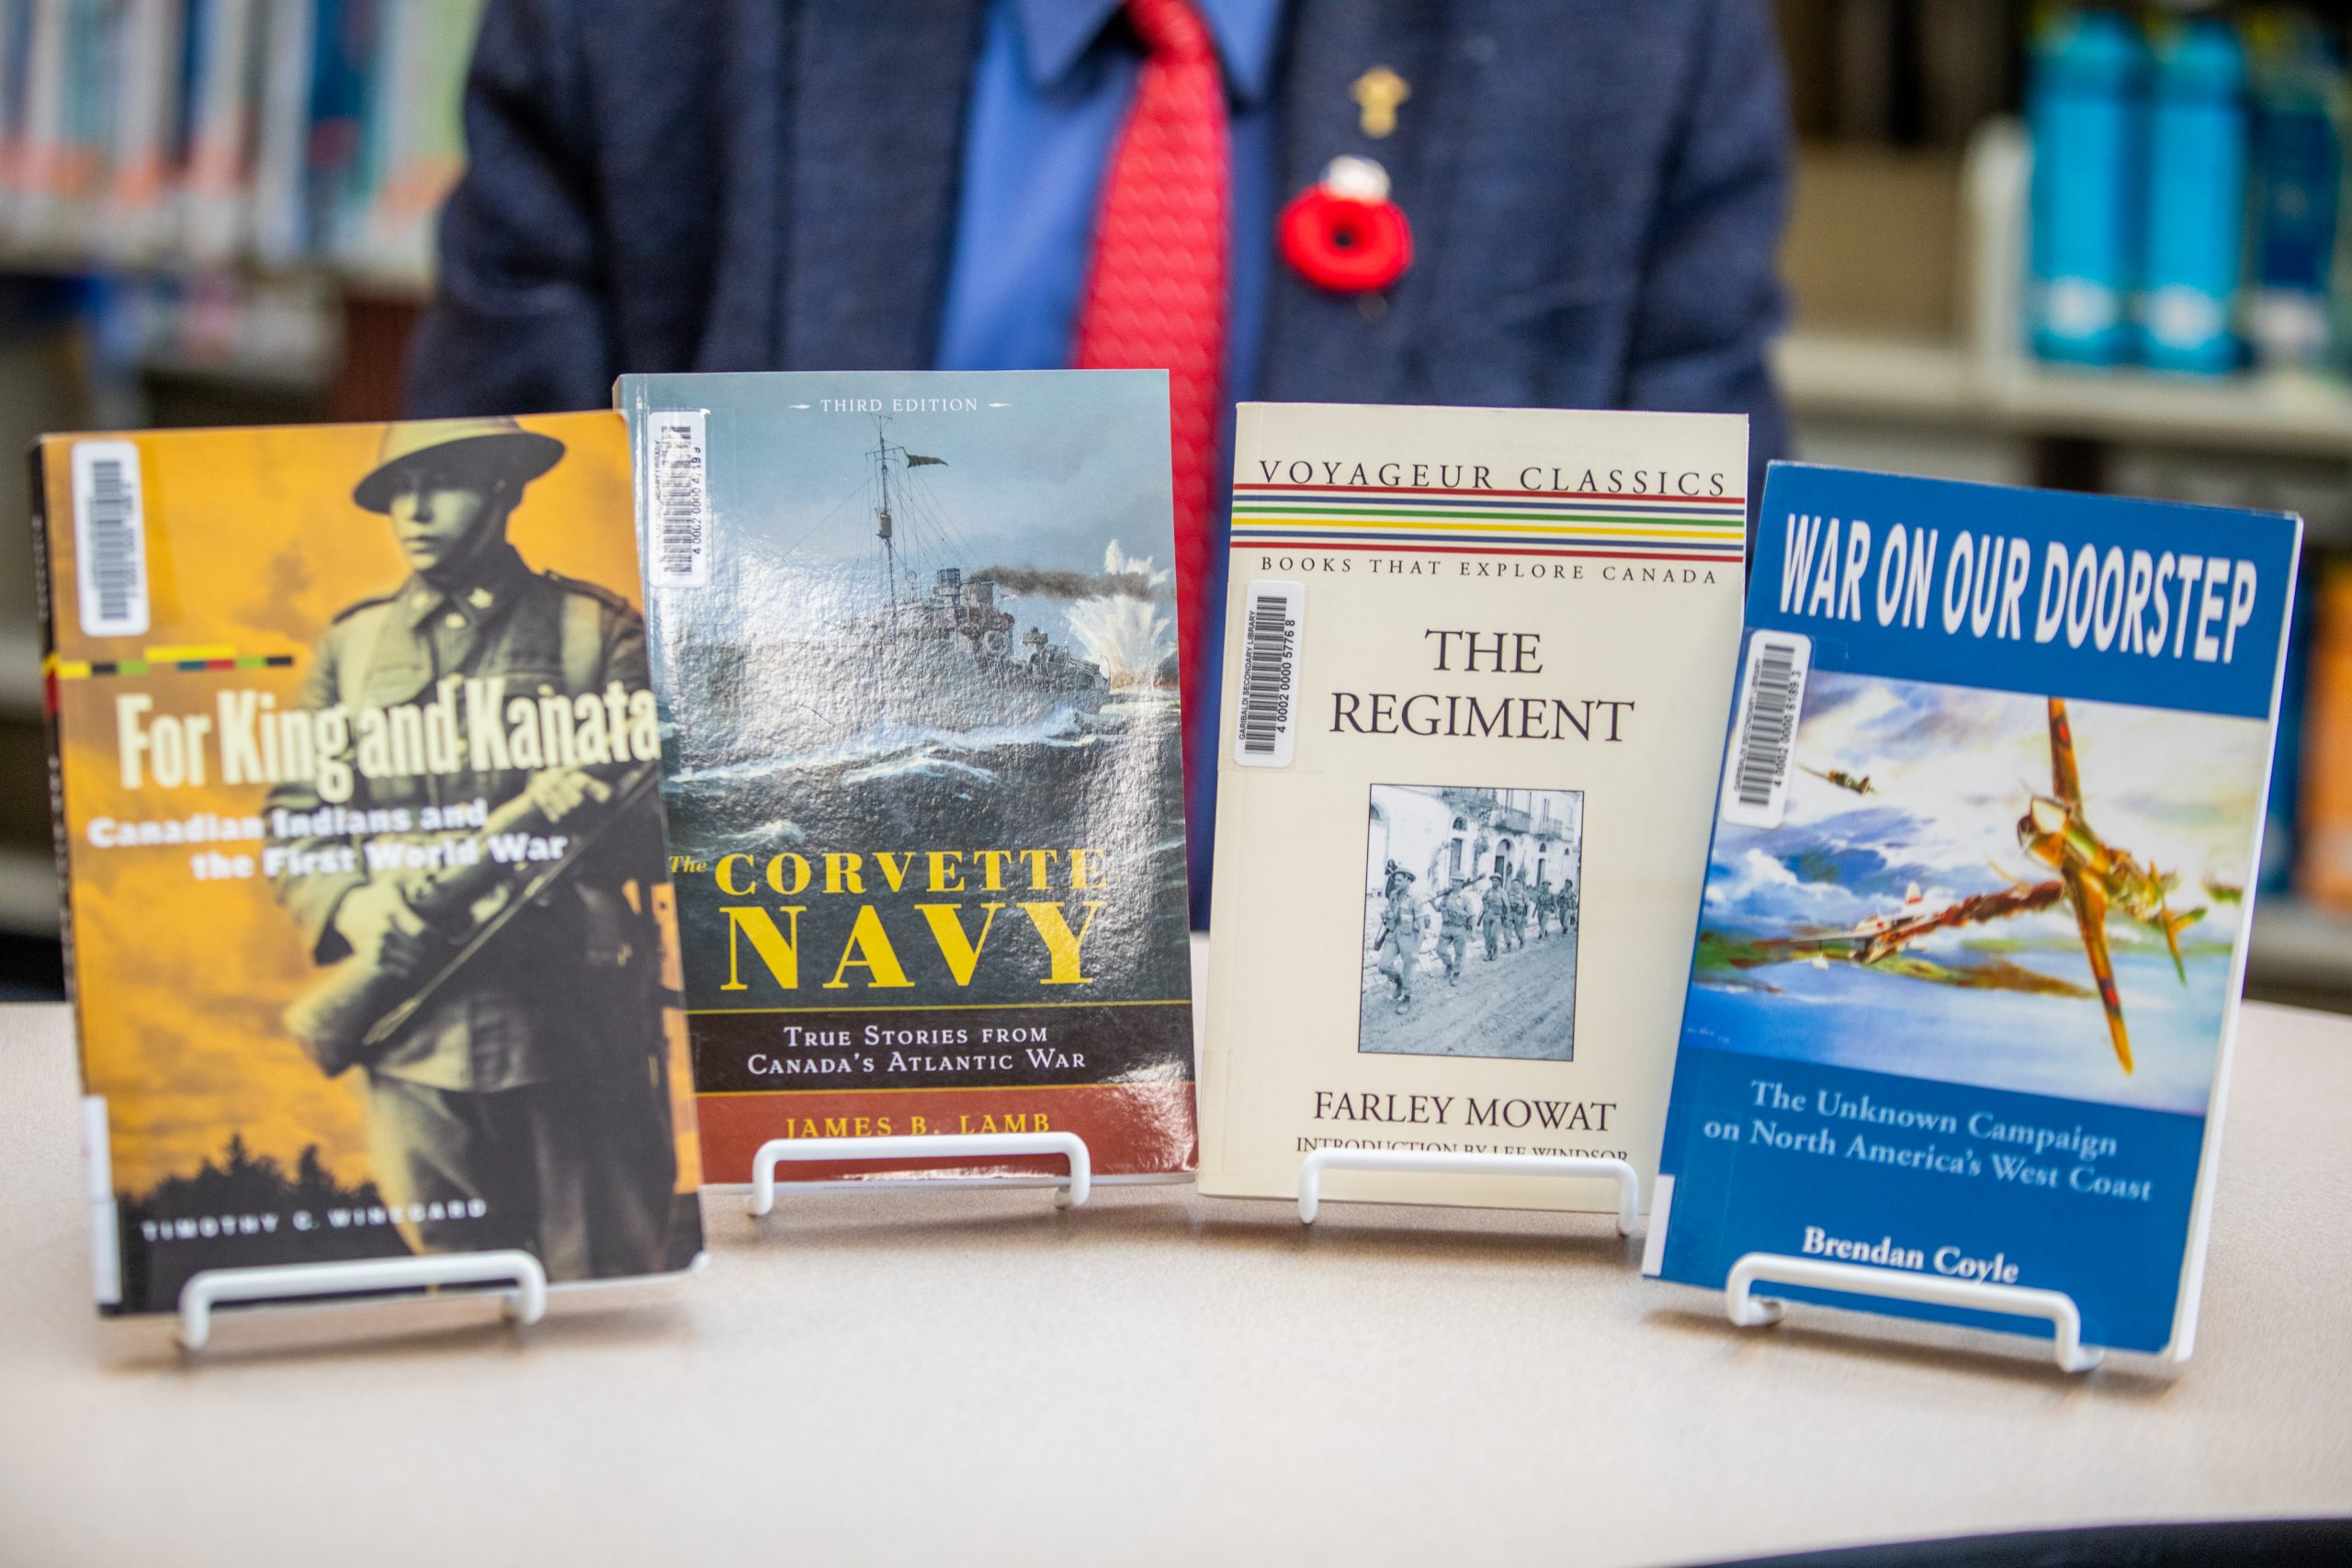 The book covers of "For King and Kanata," "The Corvette Navy," "War on Our Doorstep," and "The Regiment."